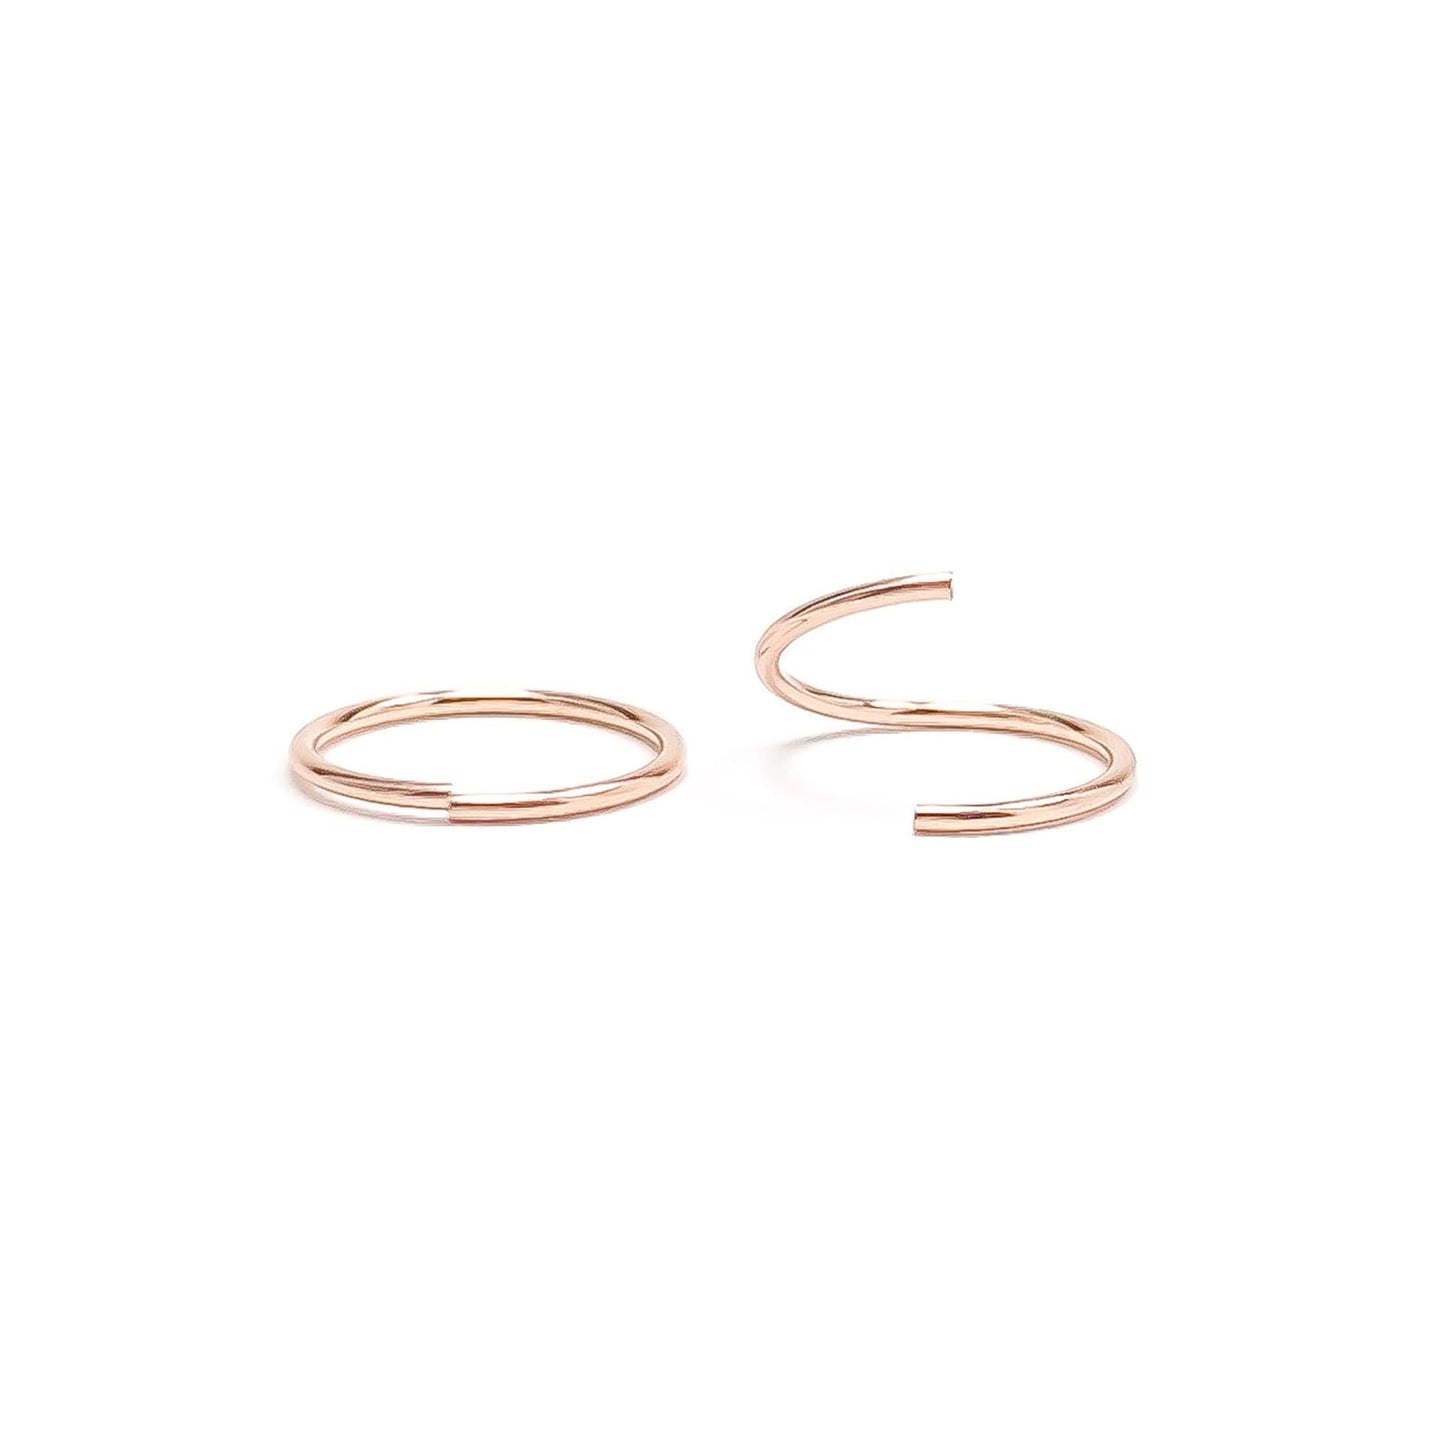 Solid 14K Gold Rose Gold Hoops, Continuous